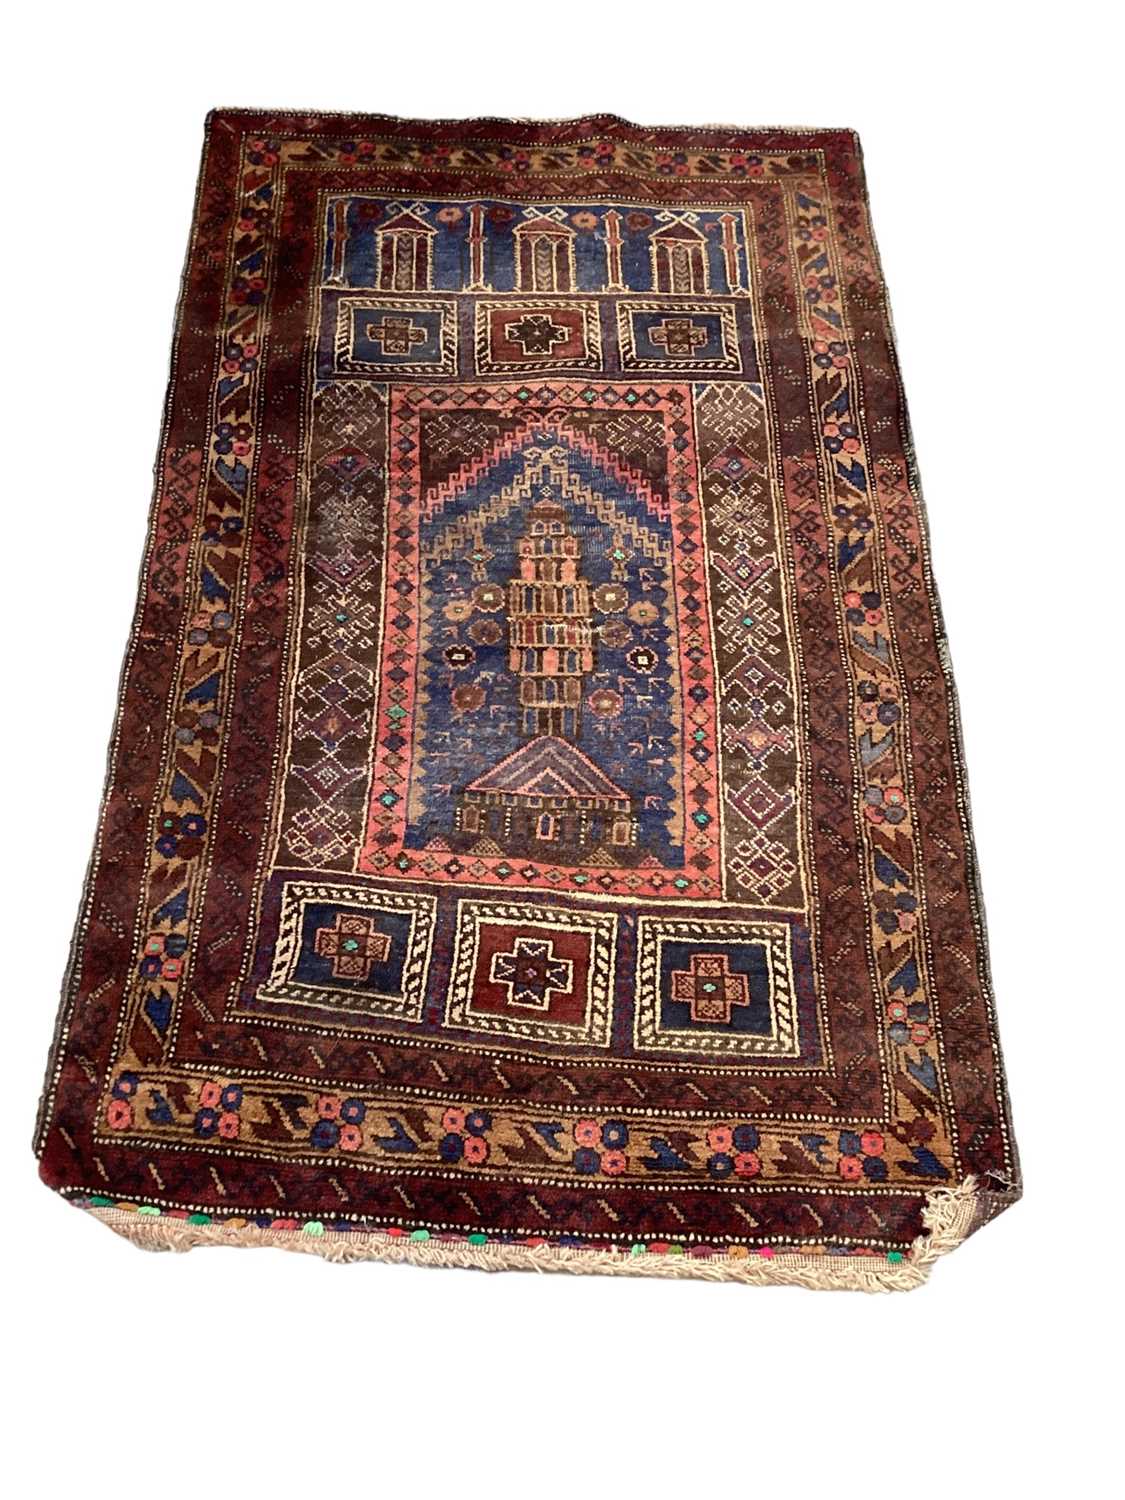 Eastern rug decorated with buildings on red, blue and brown ground, 128cm x 80cm